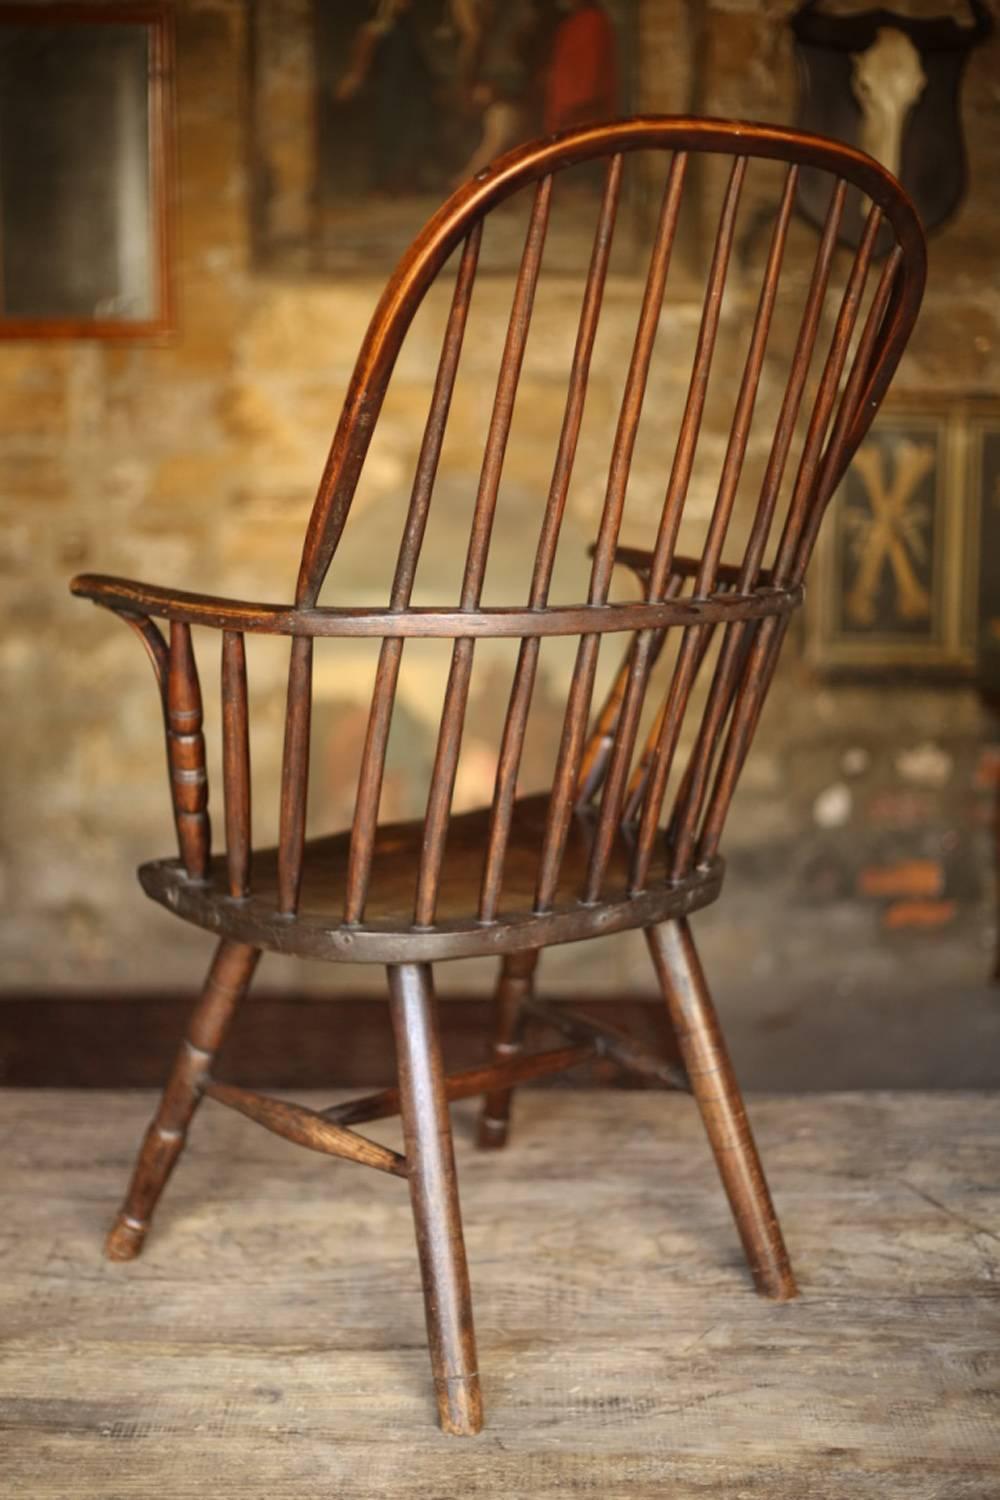 Great Britain (UK) 18th Century Ash and Elm High Backed Windsor Armchair